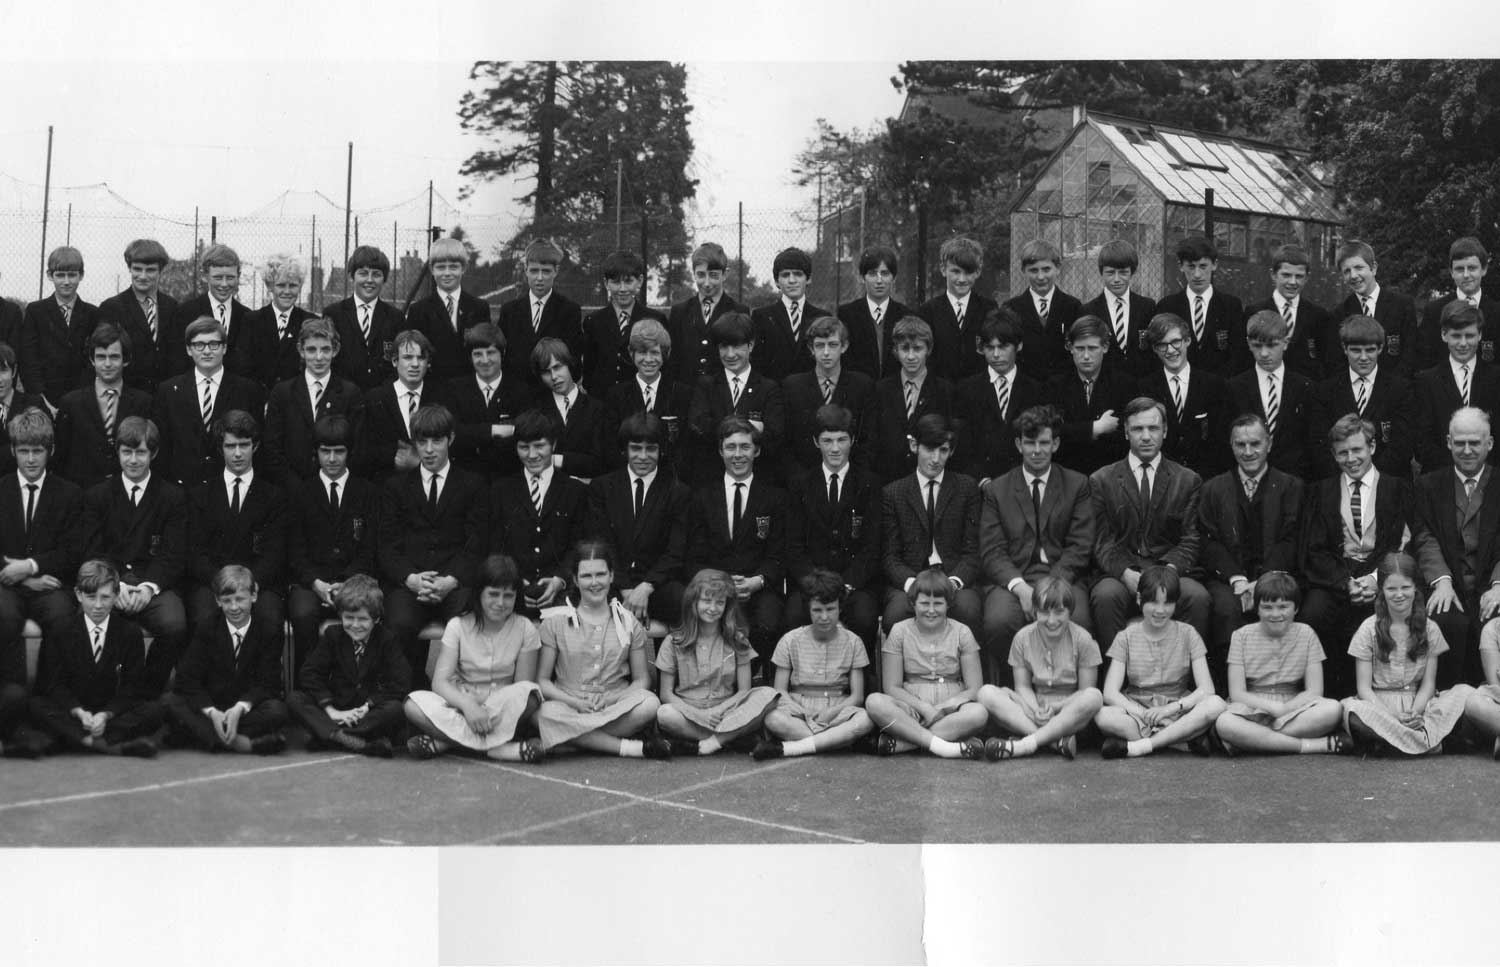 A photo of section1 of the Bells Grammar School photo from 1968 - section 2